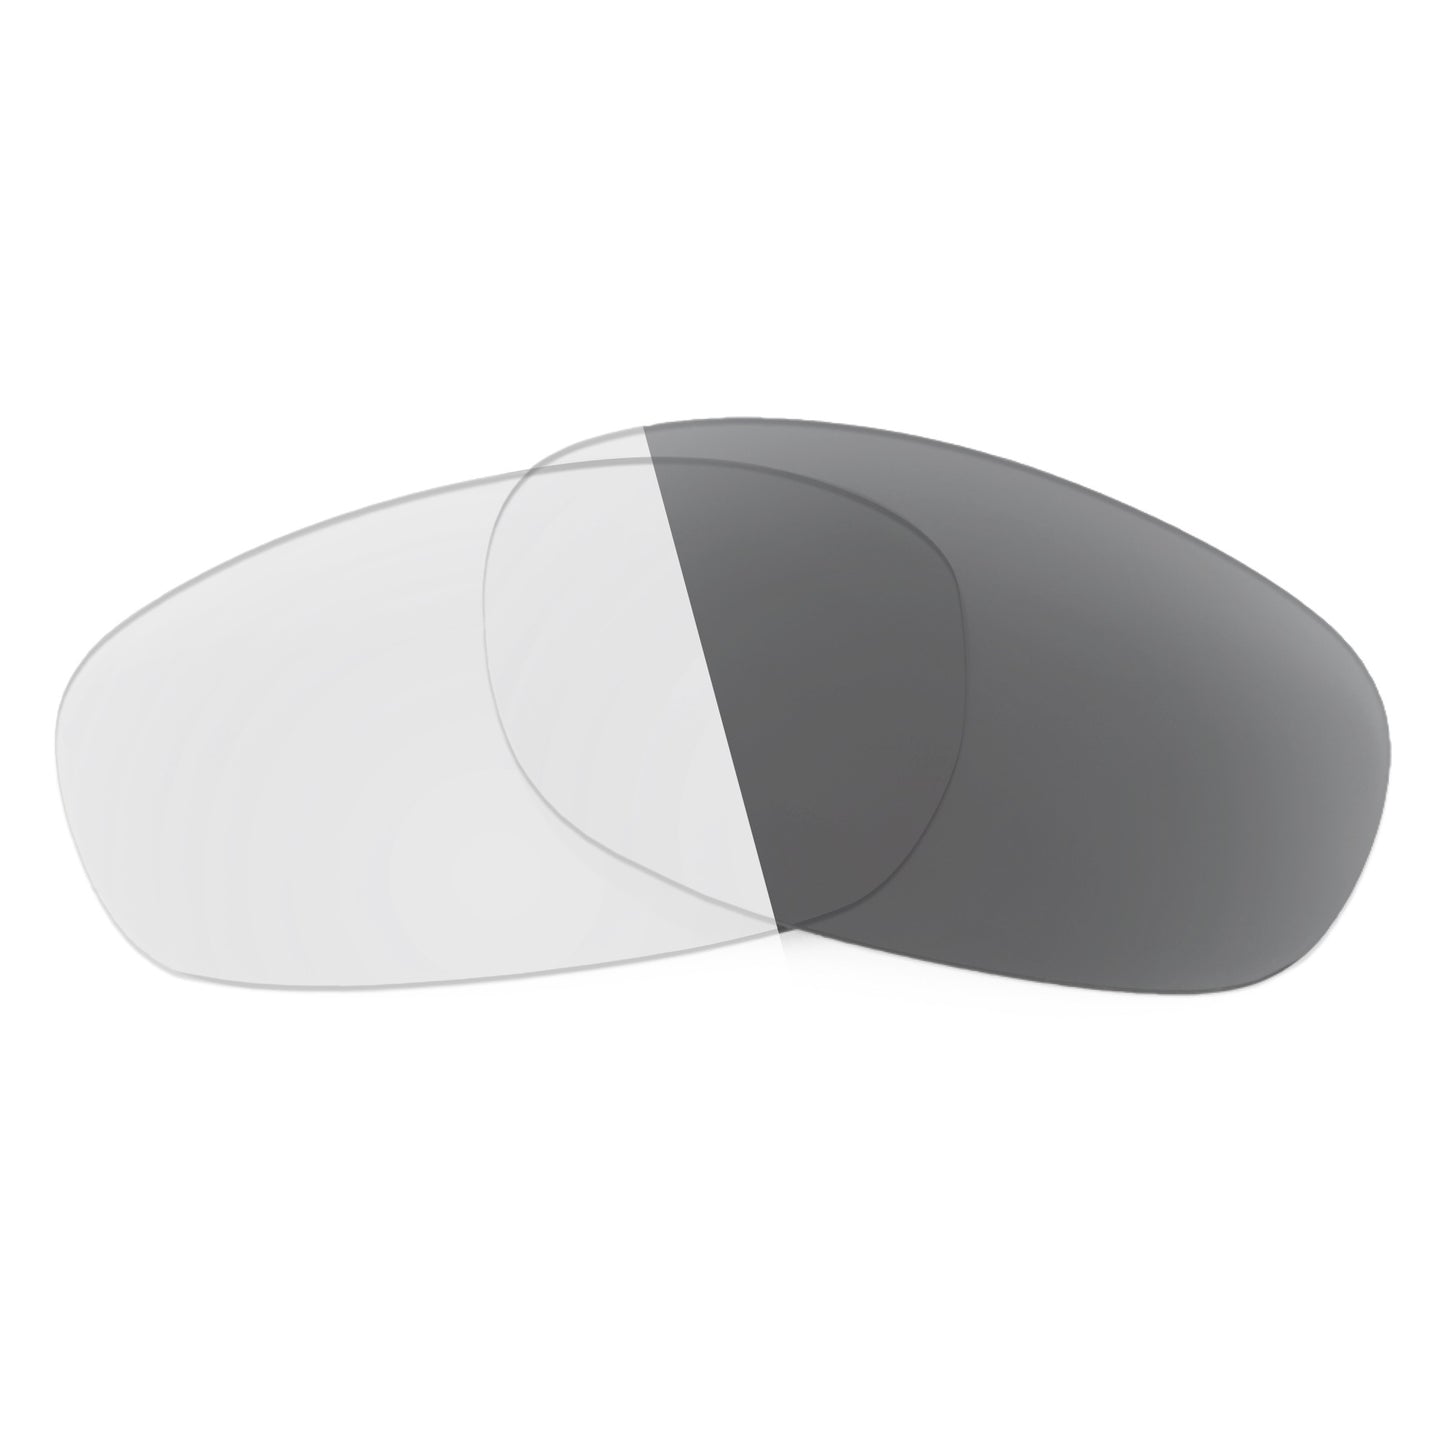 Revant replacement lenses for Ray-Ban Orbs Prophecy W2809 (B&L) 52mm Non-Polarized Adapt Gray Photochromic